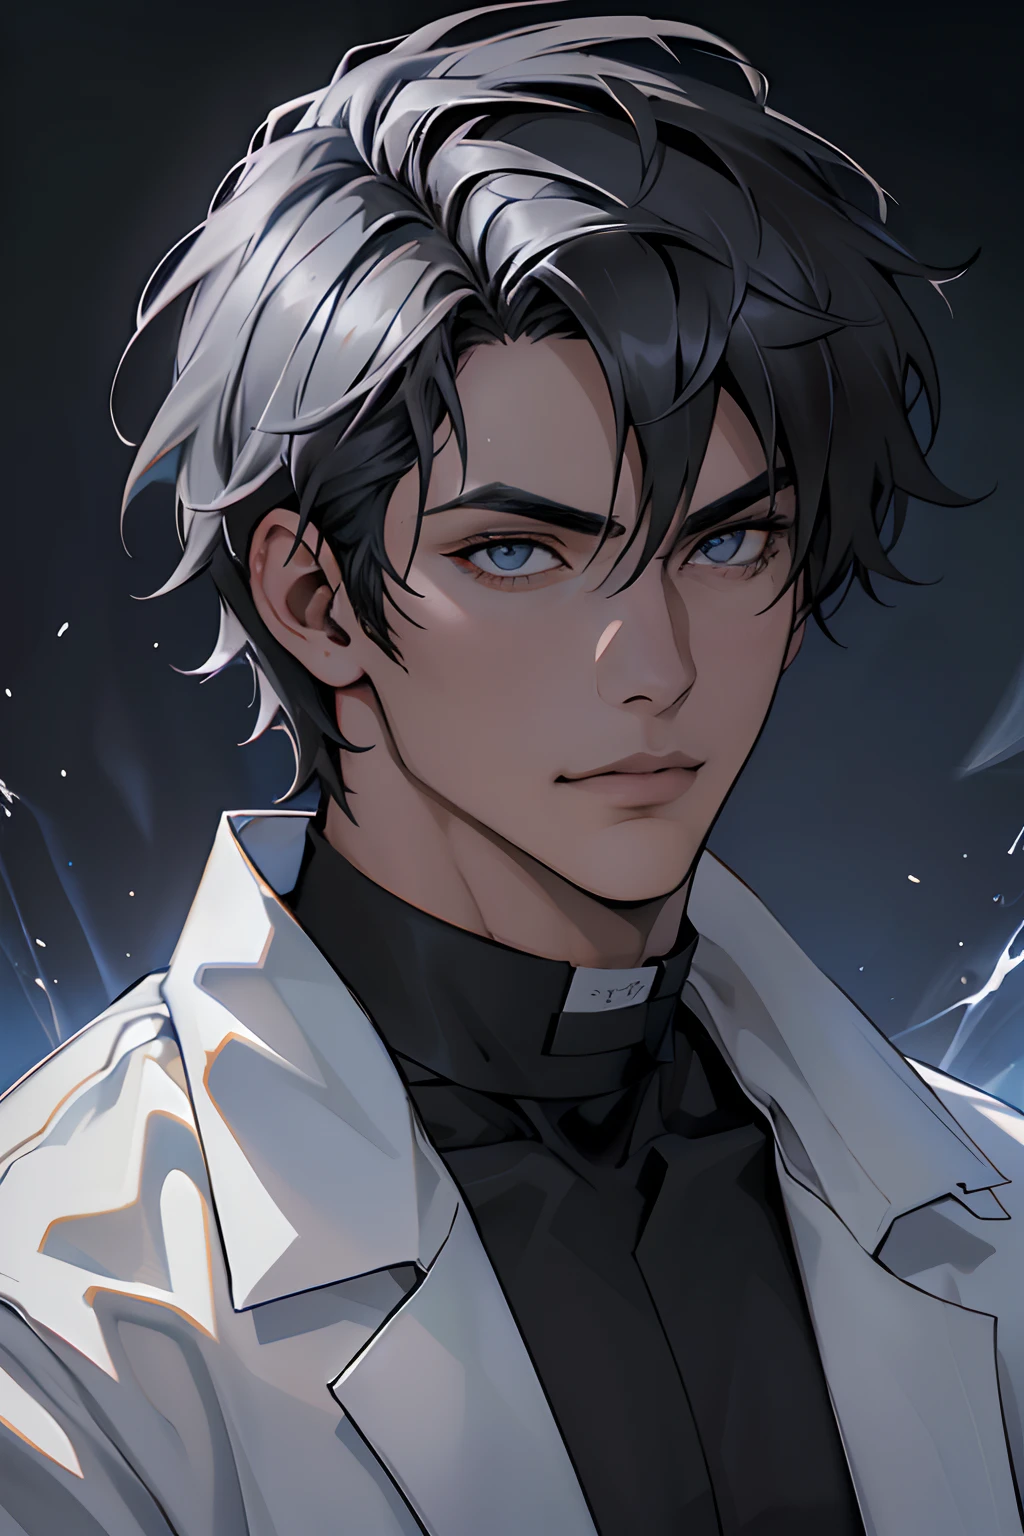 "(The best quality,4k,8k,High Resolutions,Masterpiece:1.2),ultra detailed,(realist,fotorrealist,fotorrealist:1.37), Manhwa Art European 25 years old man, ivory skin, Messy hair jet black hair, piercing eyes, gray iris, Wearing black coat with demonic skull logo, razor-sharp jawline, glare, Cold and mysterious character, whole body, athletic body, 8k, Detailed features, very handsome, Dreamy look on his face, bright illumination, blurred background